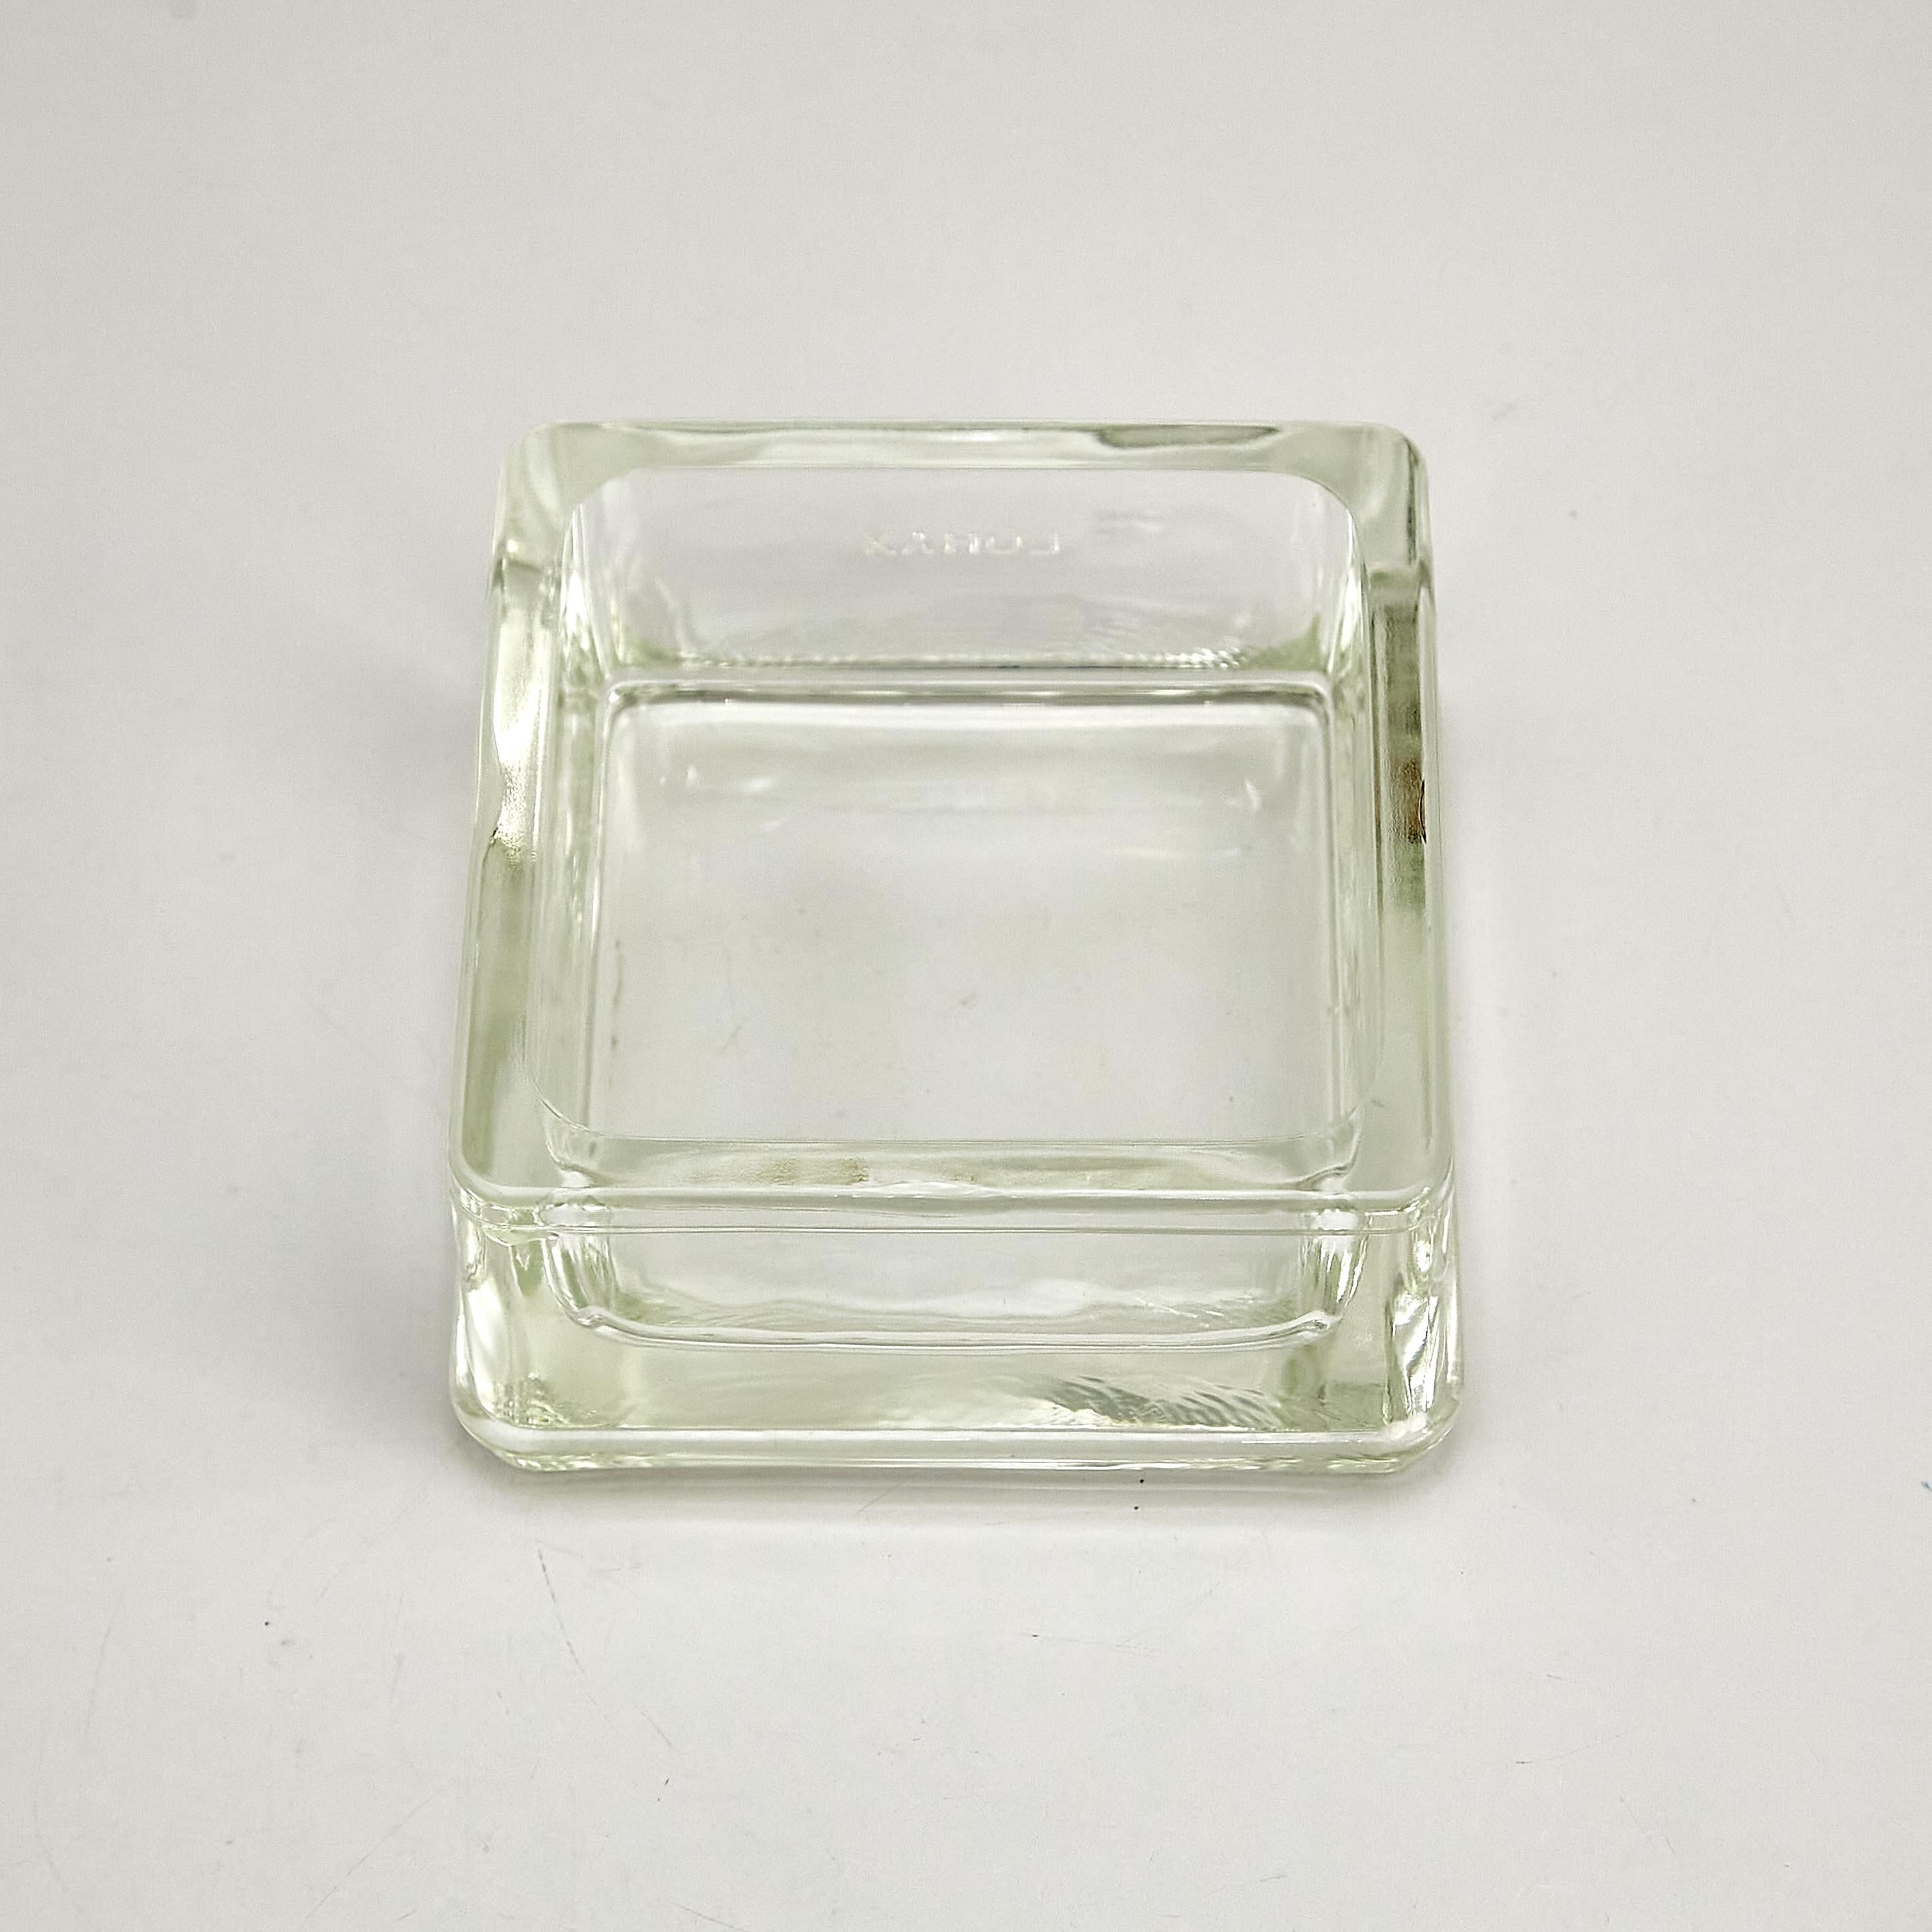 Introducing the remarkable Lumax Ashtray, a vintage masterpiece designed by the legendary Le Corbusier and Charlotte Perriand, circa 1970. Manufactured in France, this exquisite glass ashtray embodies the essence of modernist design, featuring clean